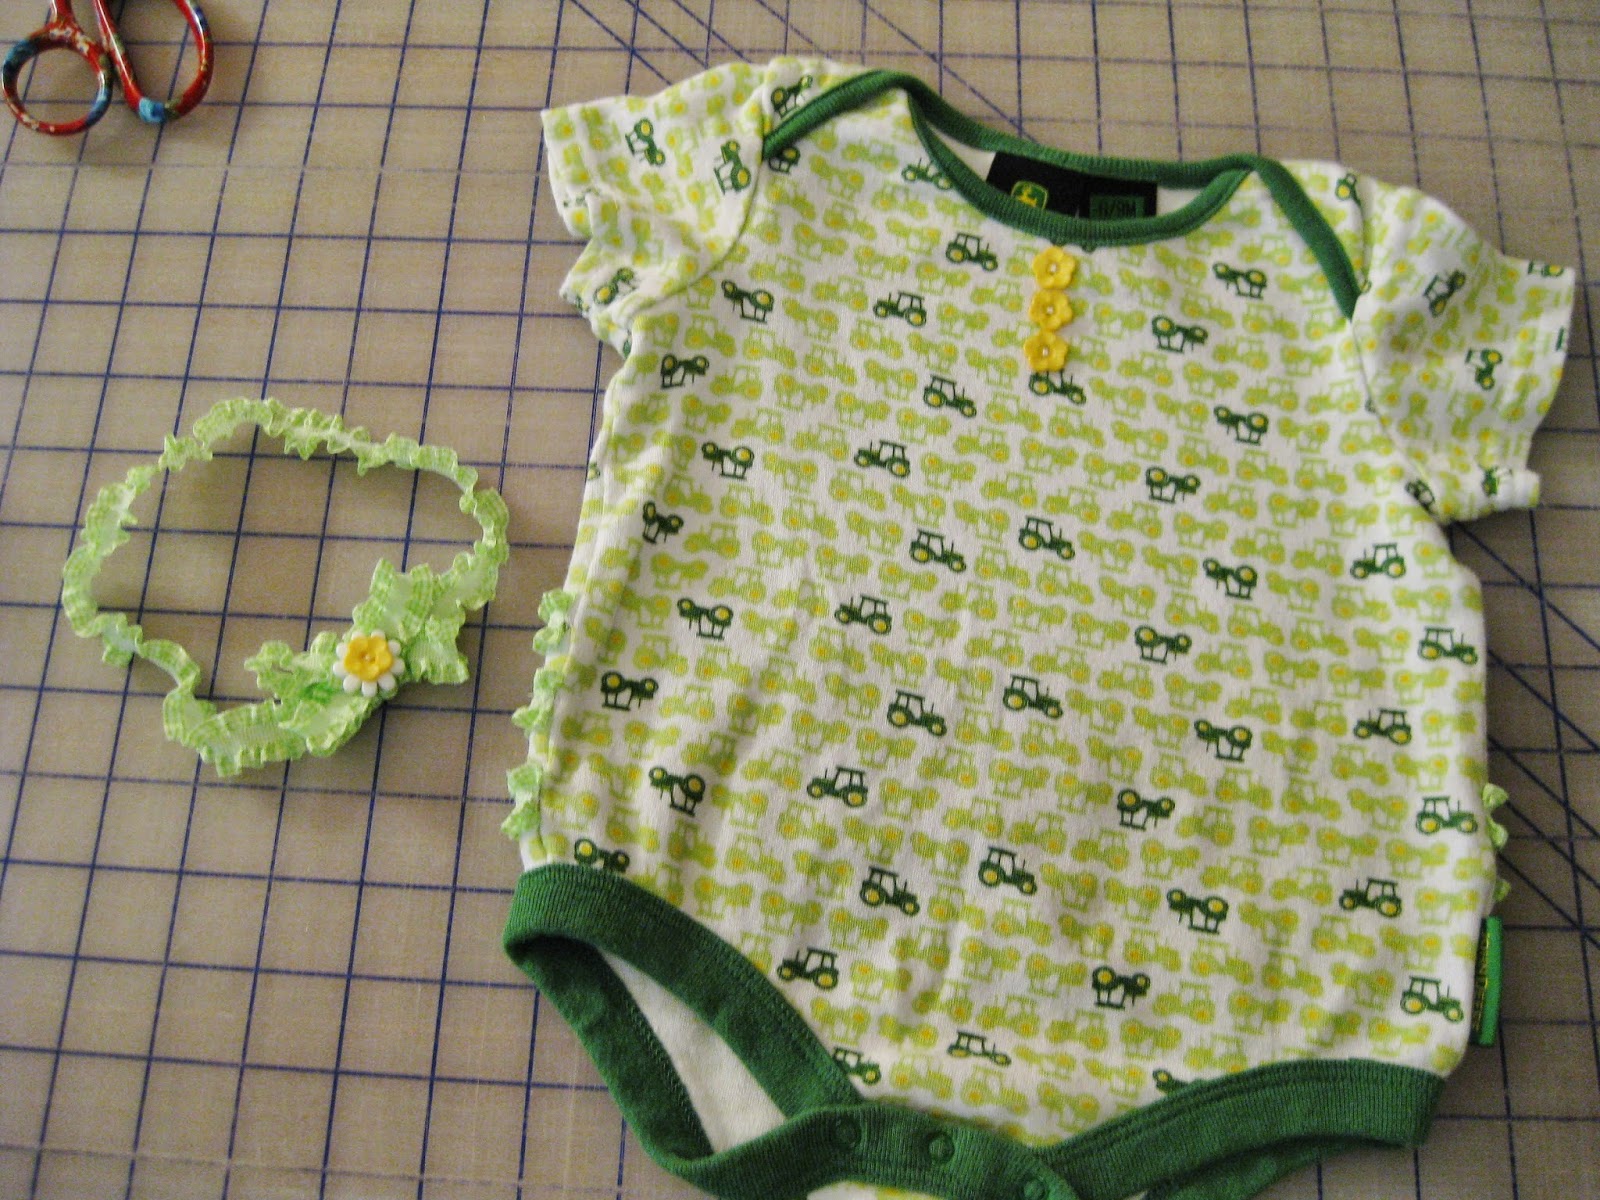 How to Make a Boring Onesie Girly | bonnieprojects.blogspot.com